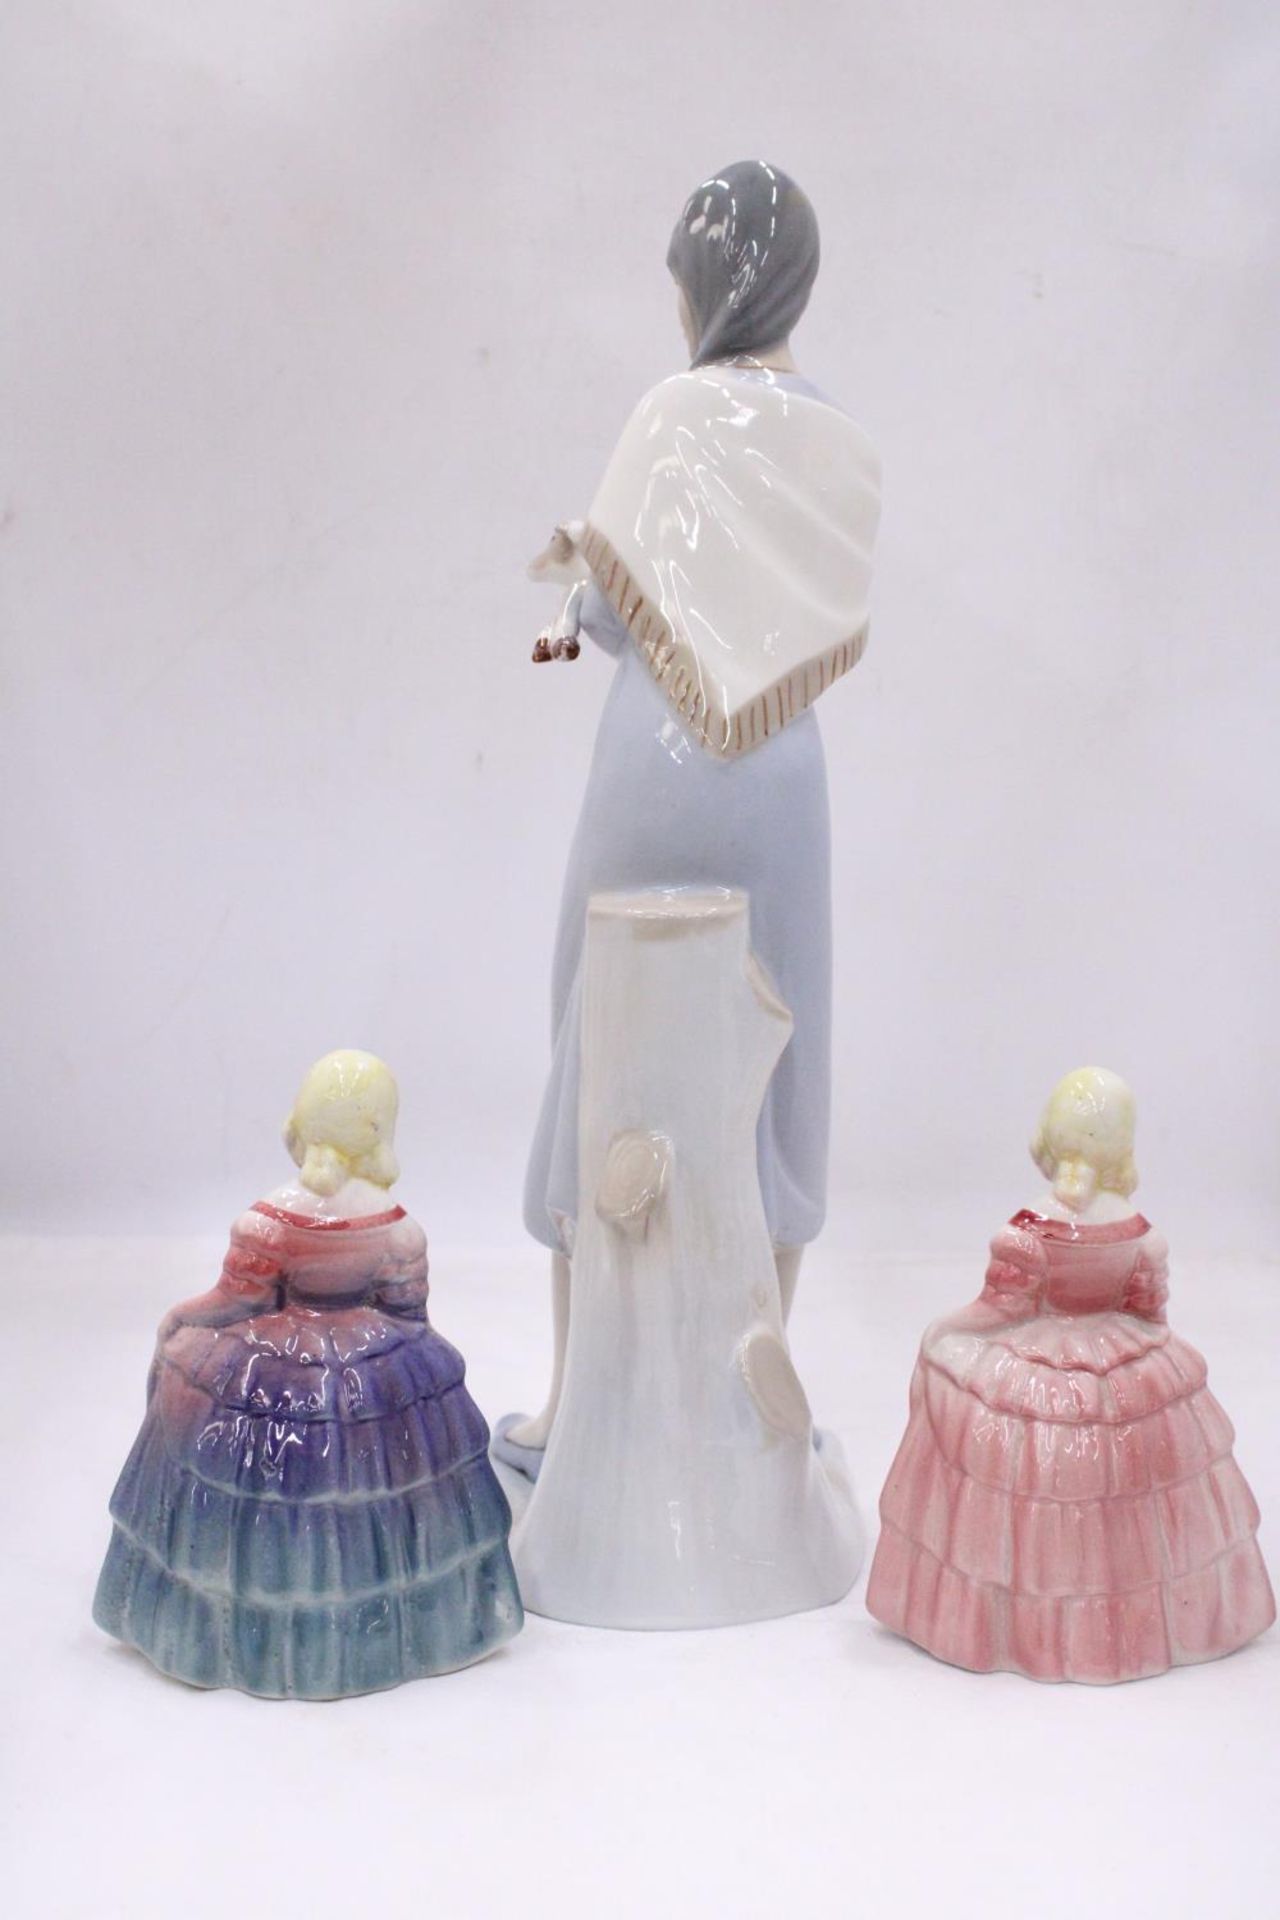 A LLADRO STYLE LADY FIGURE HOLDING A LAMB 38CM TALL, PLUS TWO ROYAL DOULTON STYLE FIGURES - Image 4 of 5